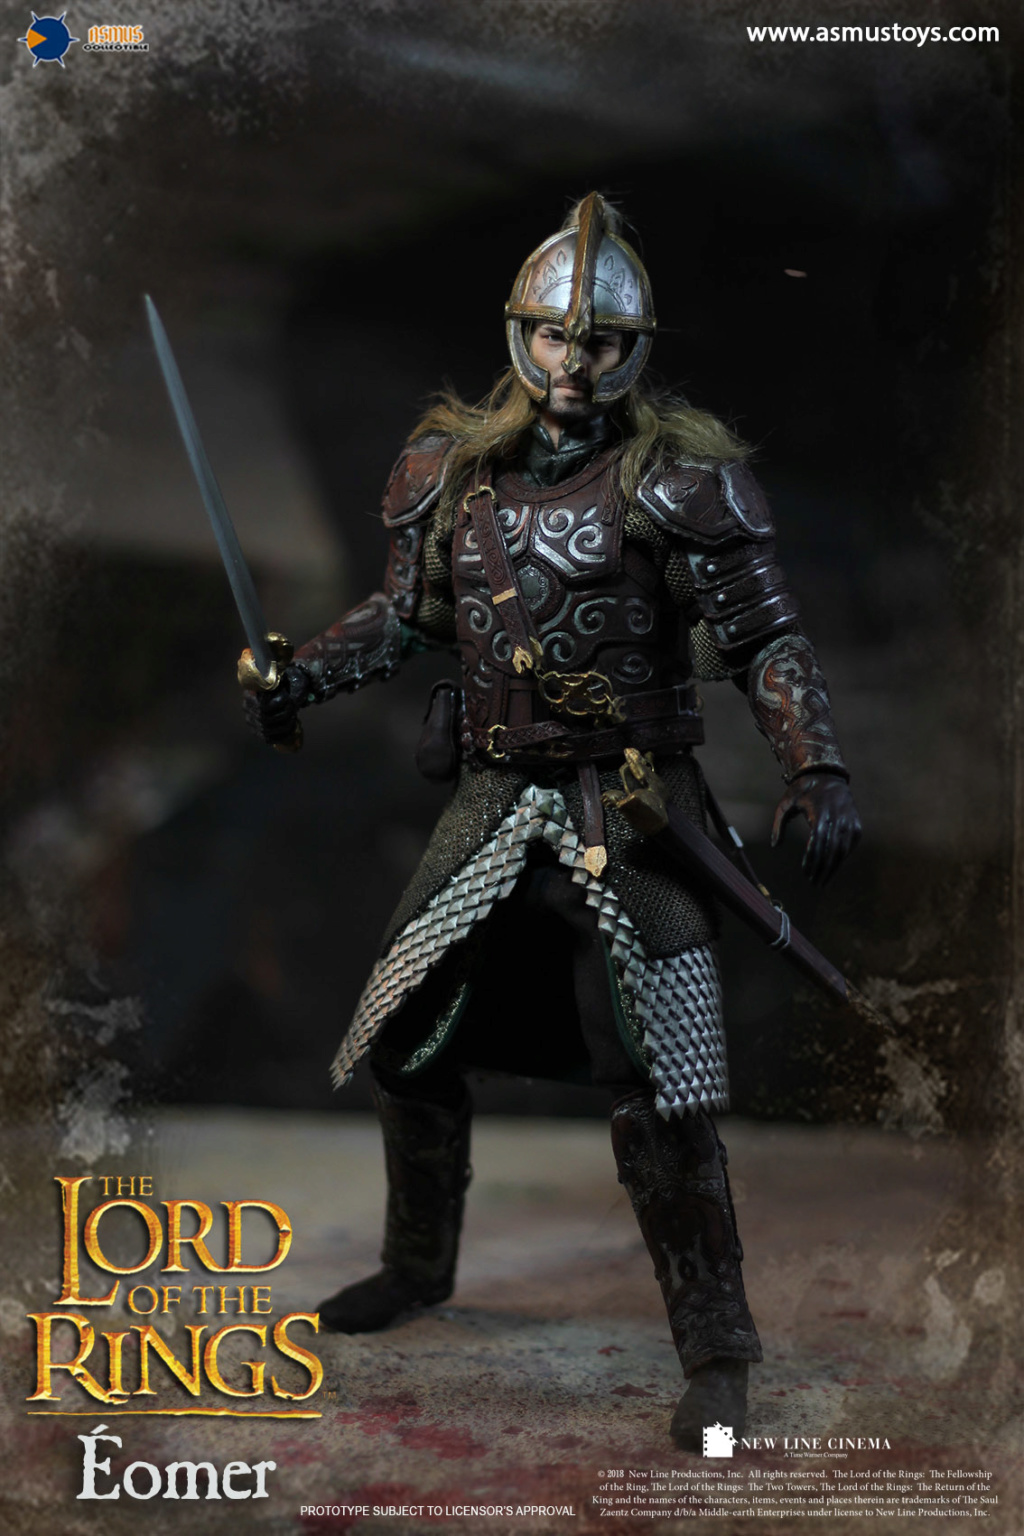 LordoftheRings - NEW PRODUCT: ASMUS TOYS THE LORD OF THE RING SIRIES: ÉOMER  (Product ID: LOTR011) 1/6 scale figure Em002210